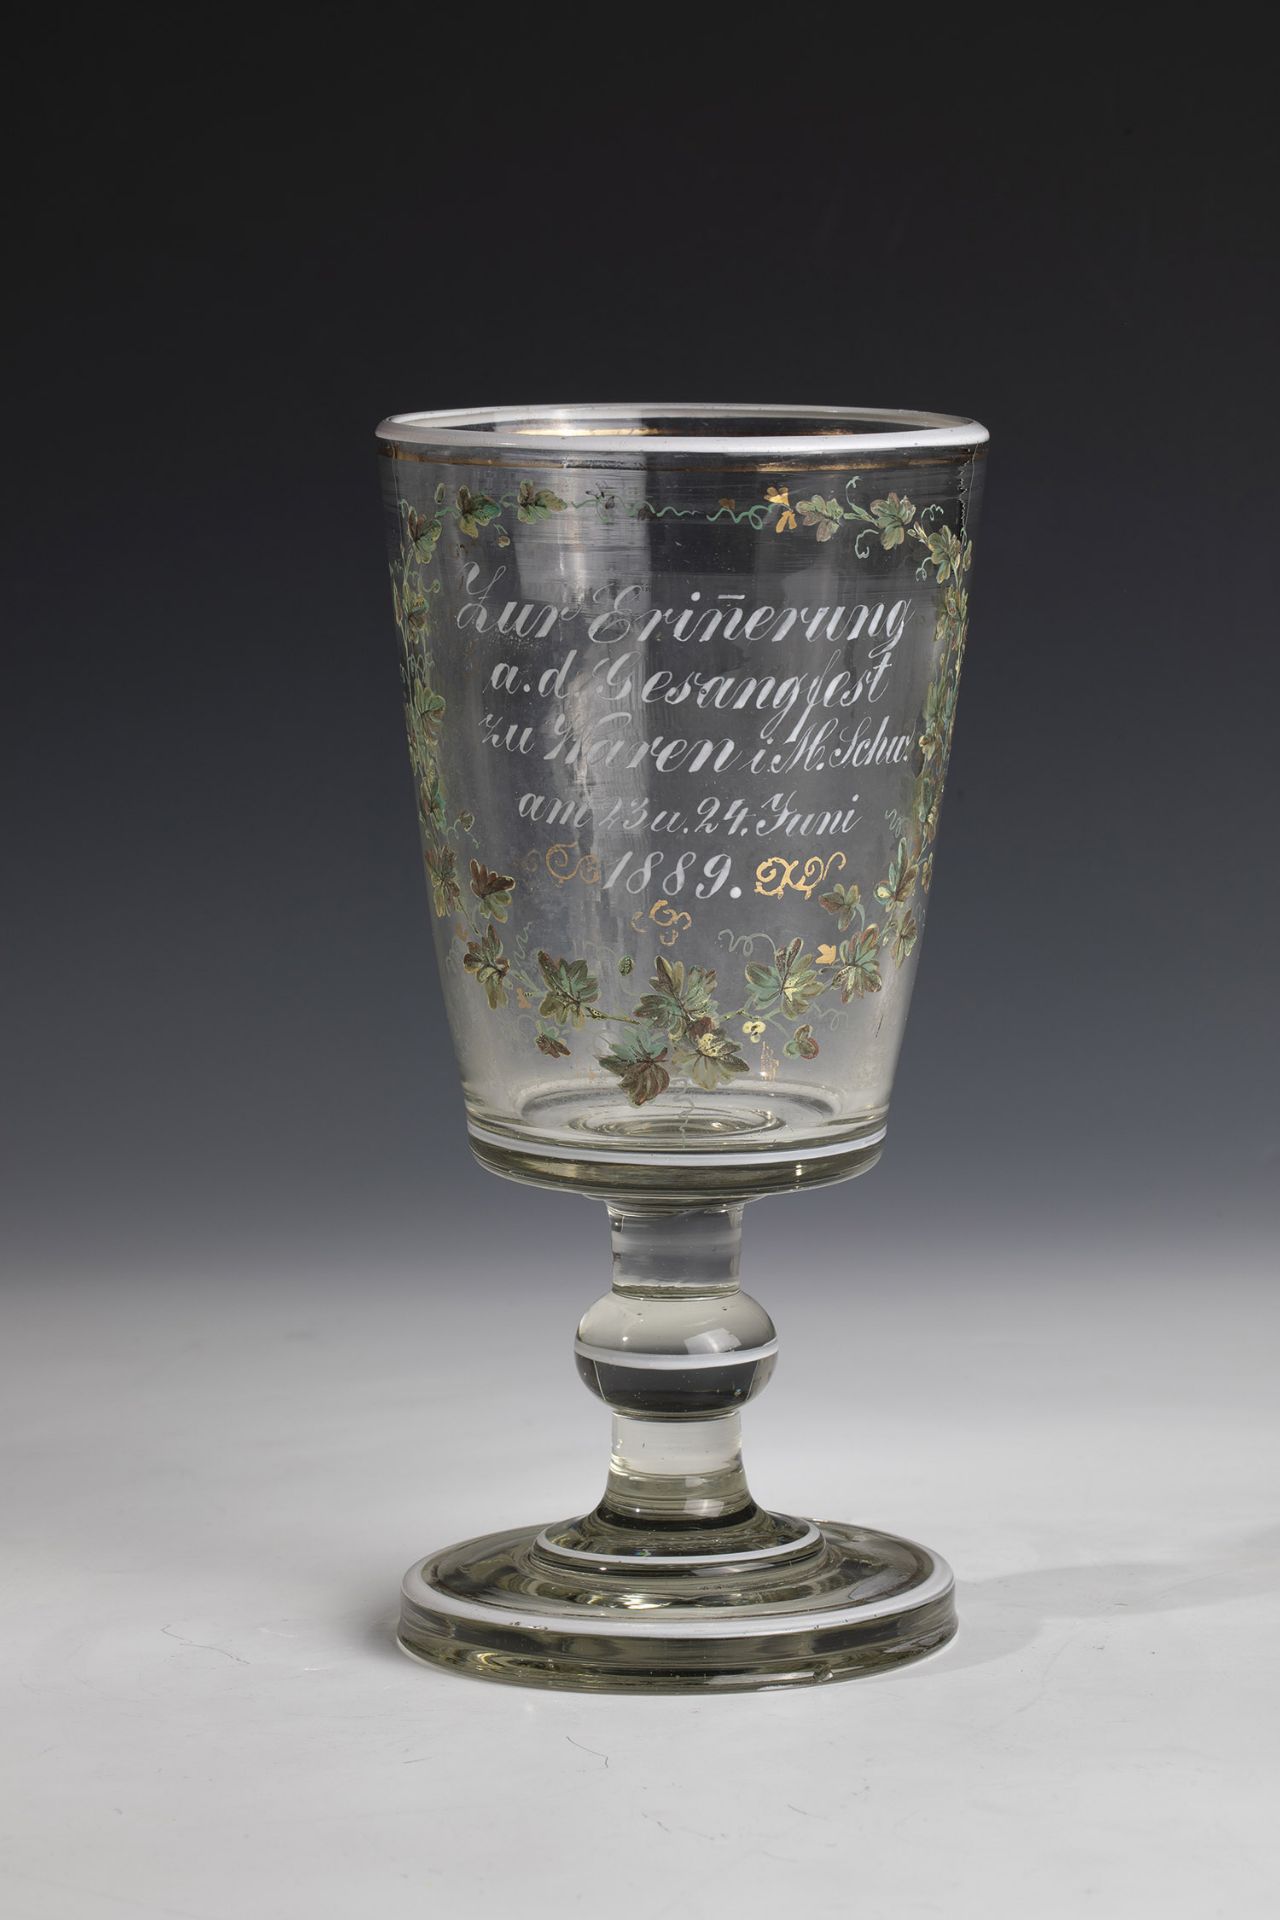 Pokal Deutschland, dat. 23 June 1889 Colourless glass with polished tear. Disc base, spherical